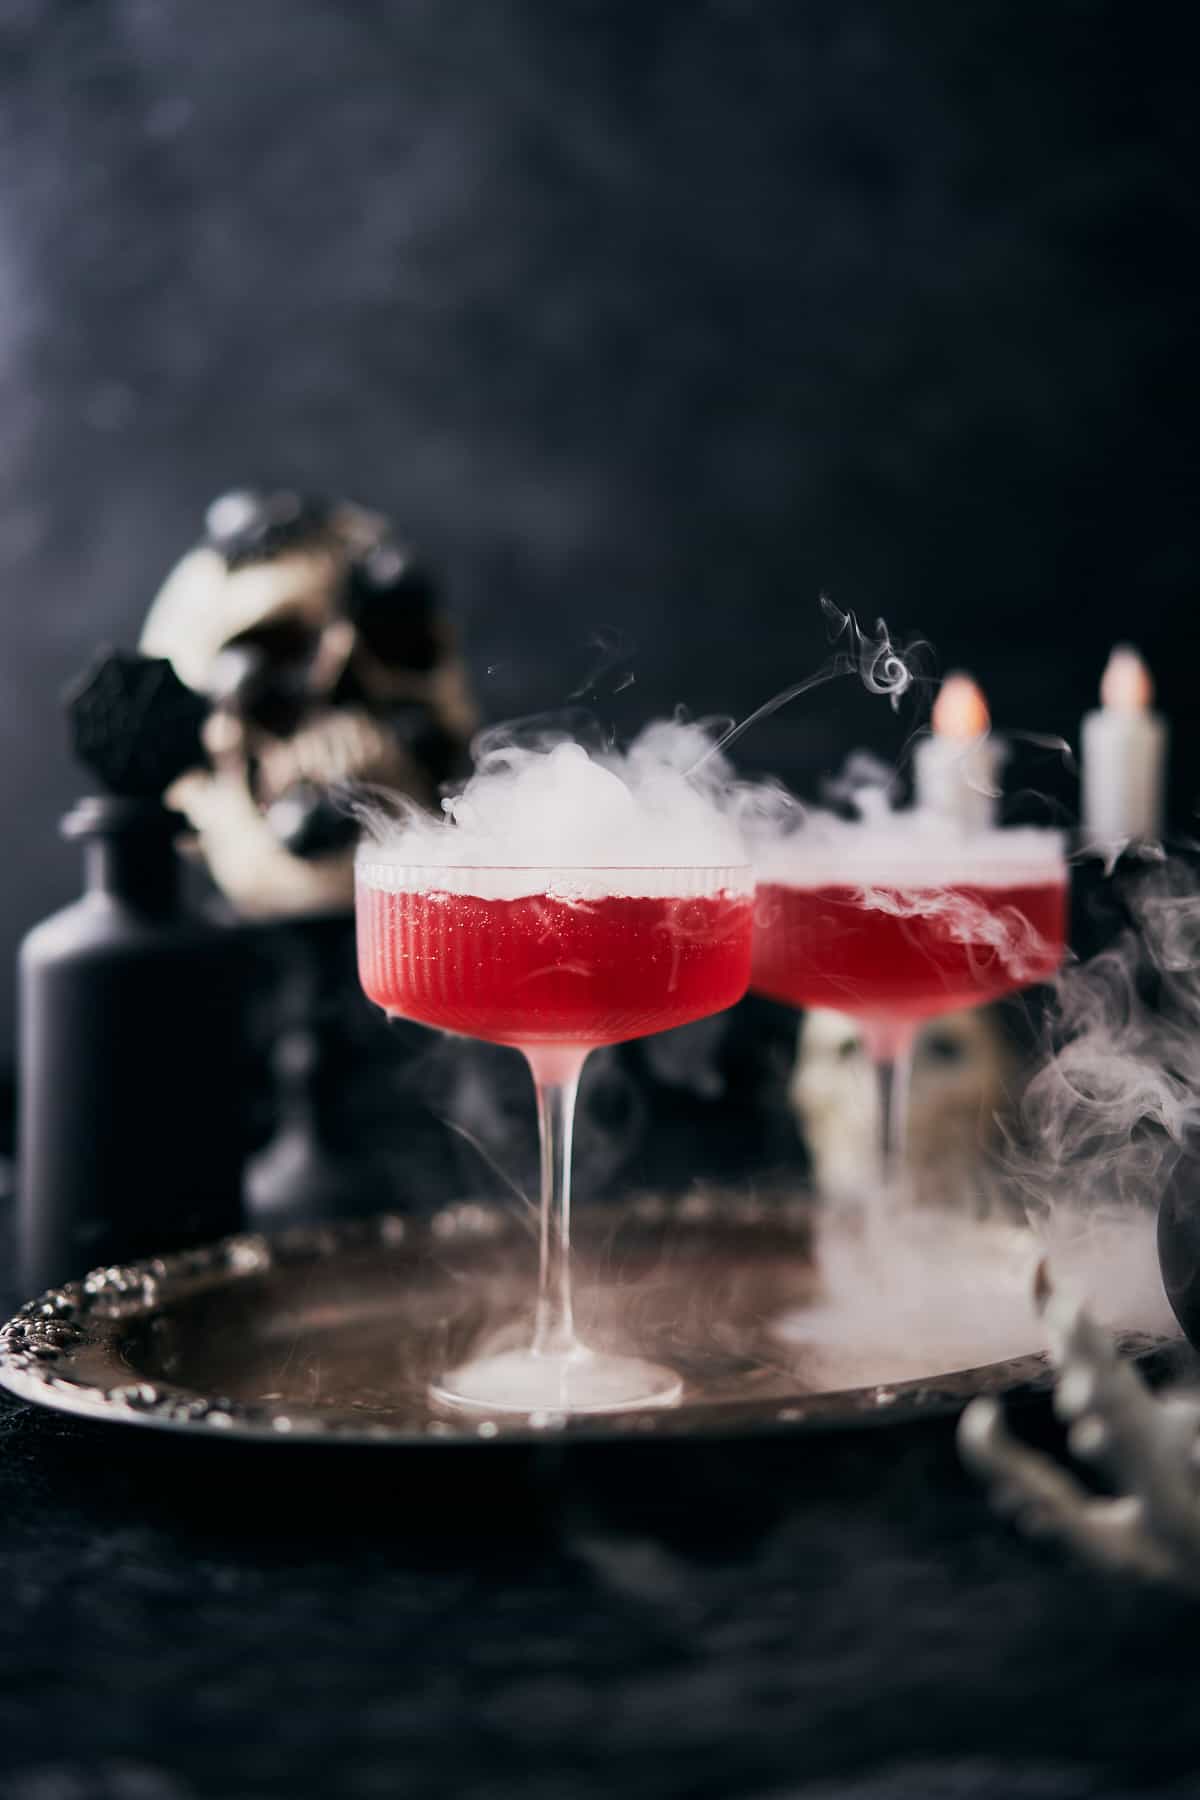 Vampire's kiss cocktail with bubbling mist and spooky decor in the background.